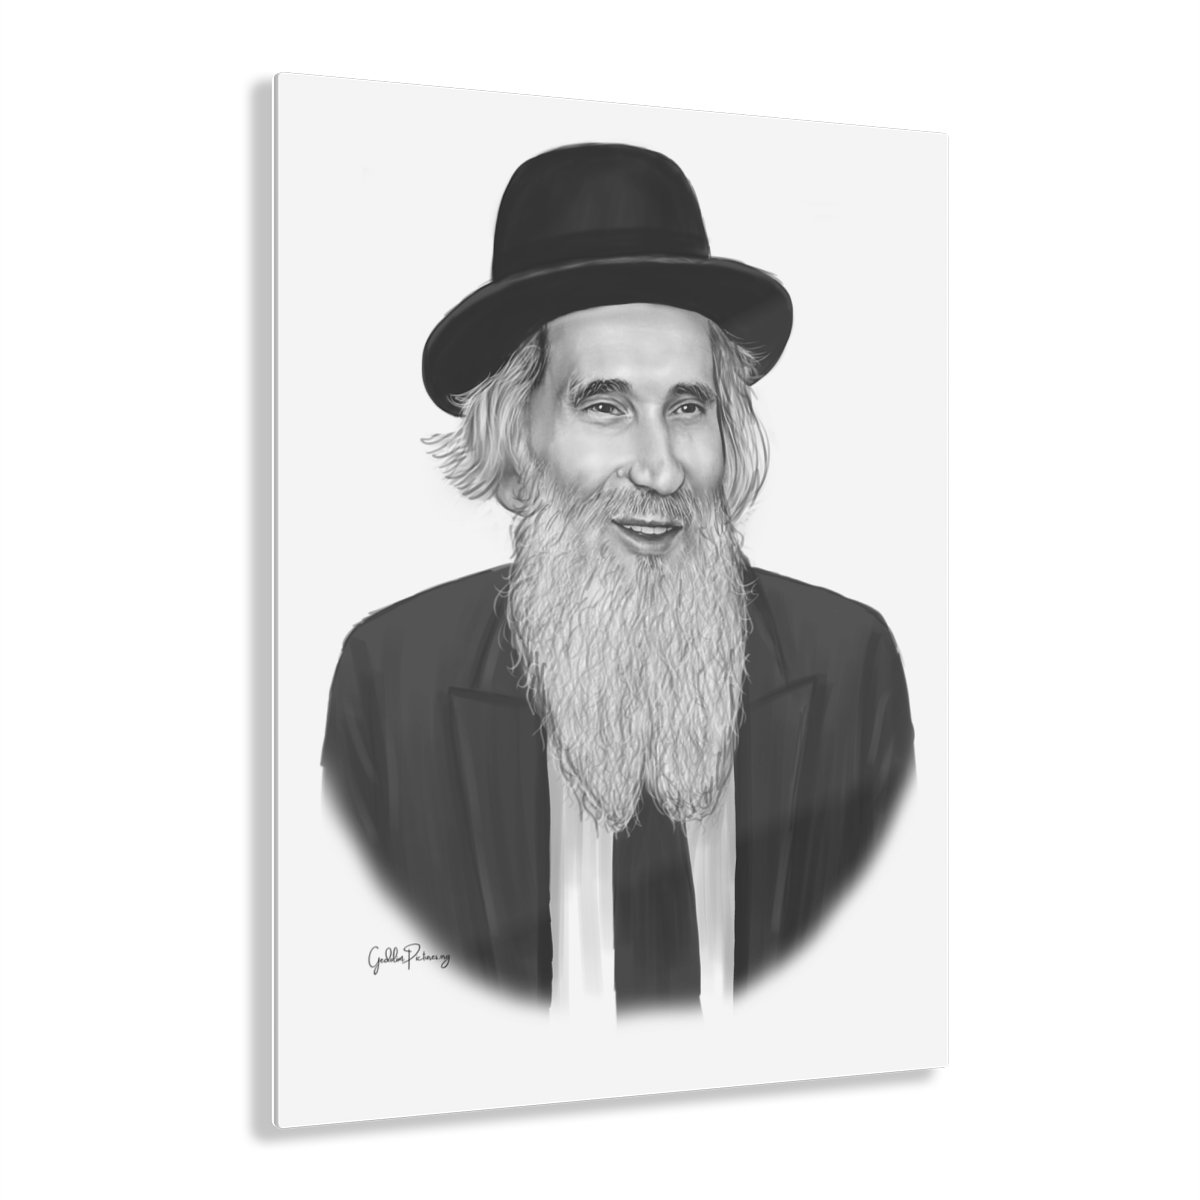 78307 100 - Gedolim Pictures